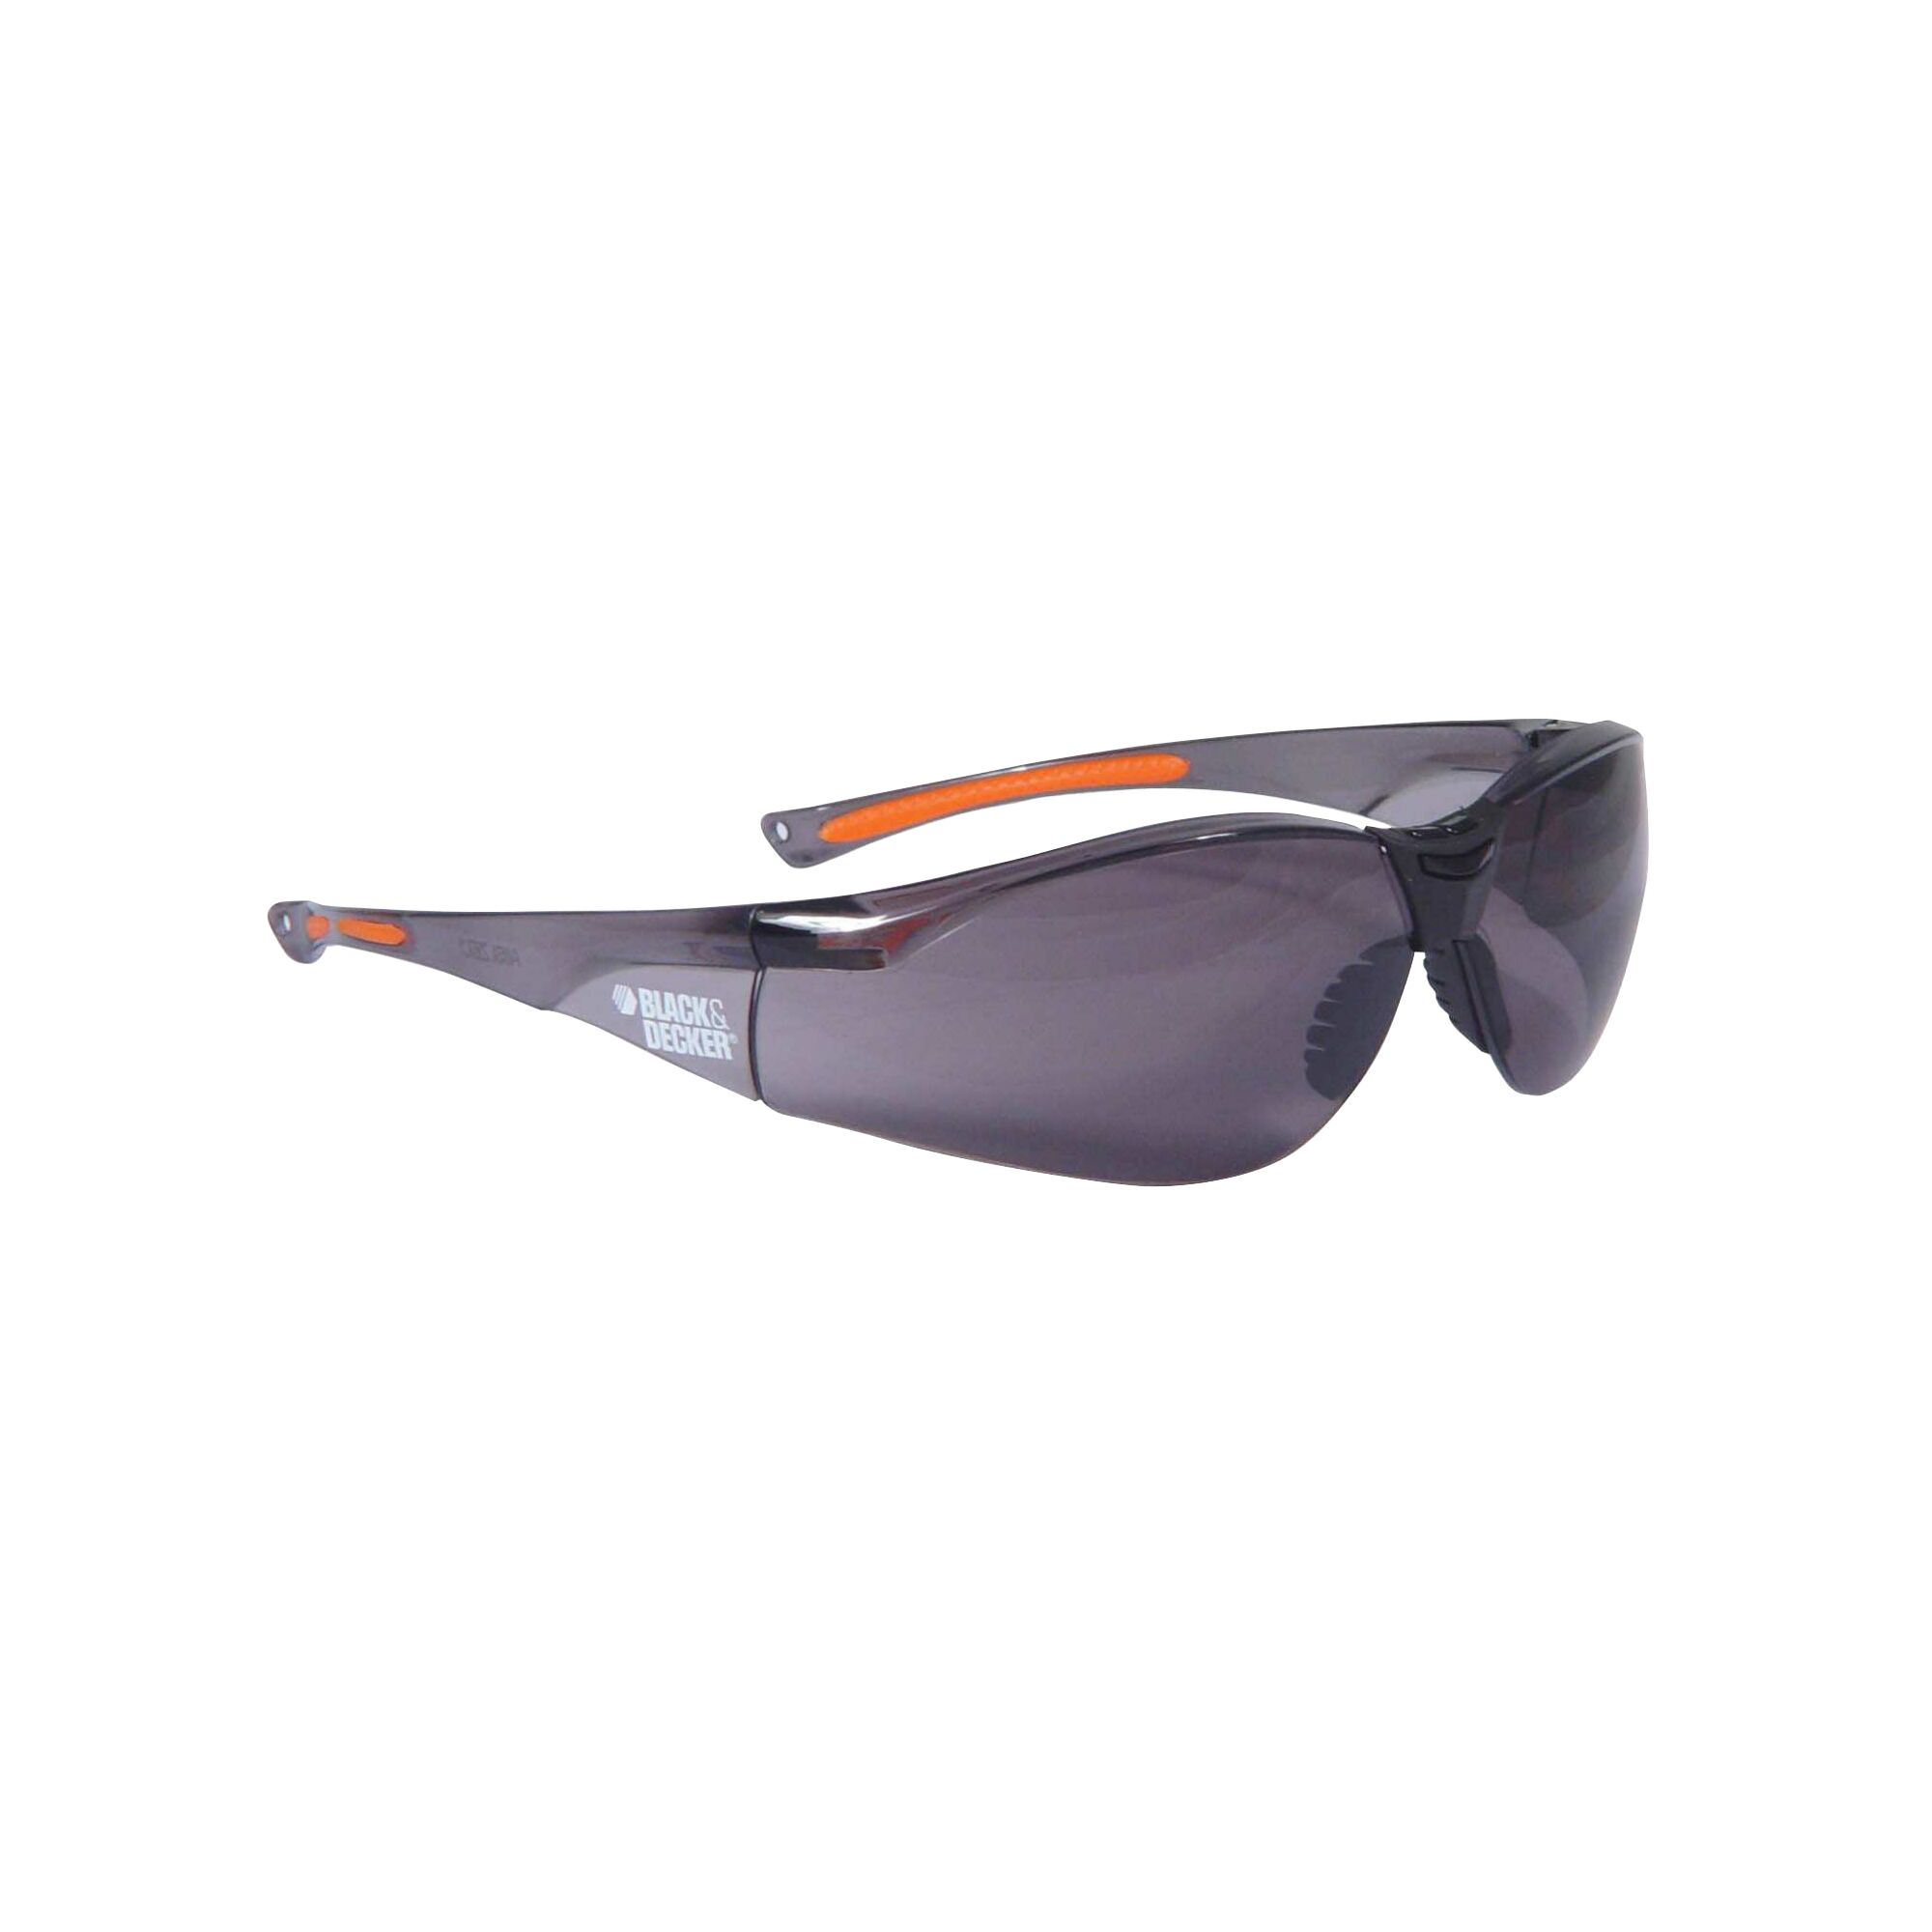 Profile of full wraparound eyewear with rubber temple grips.